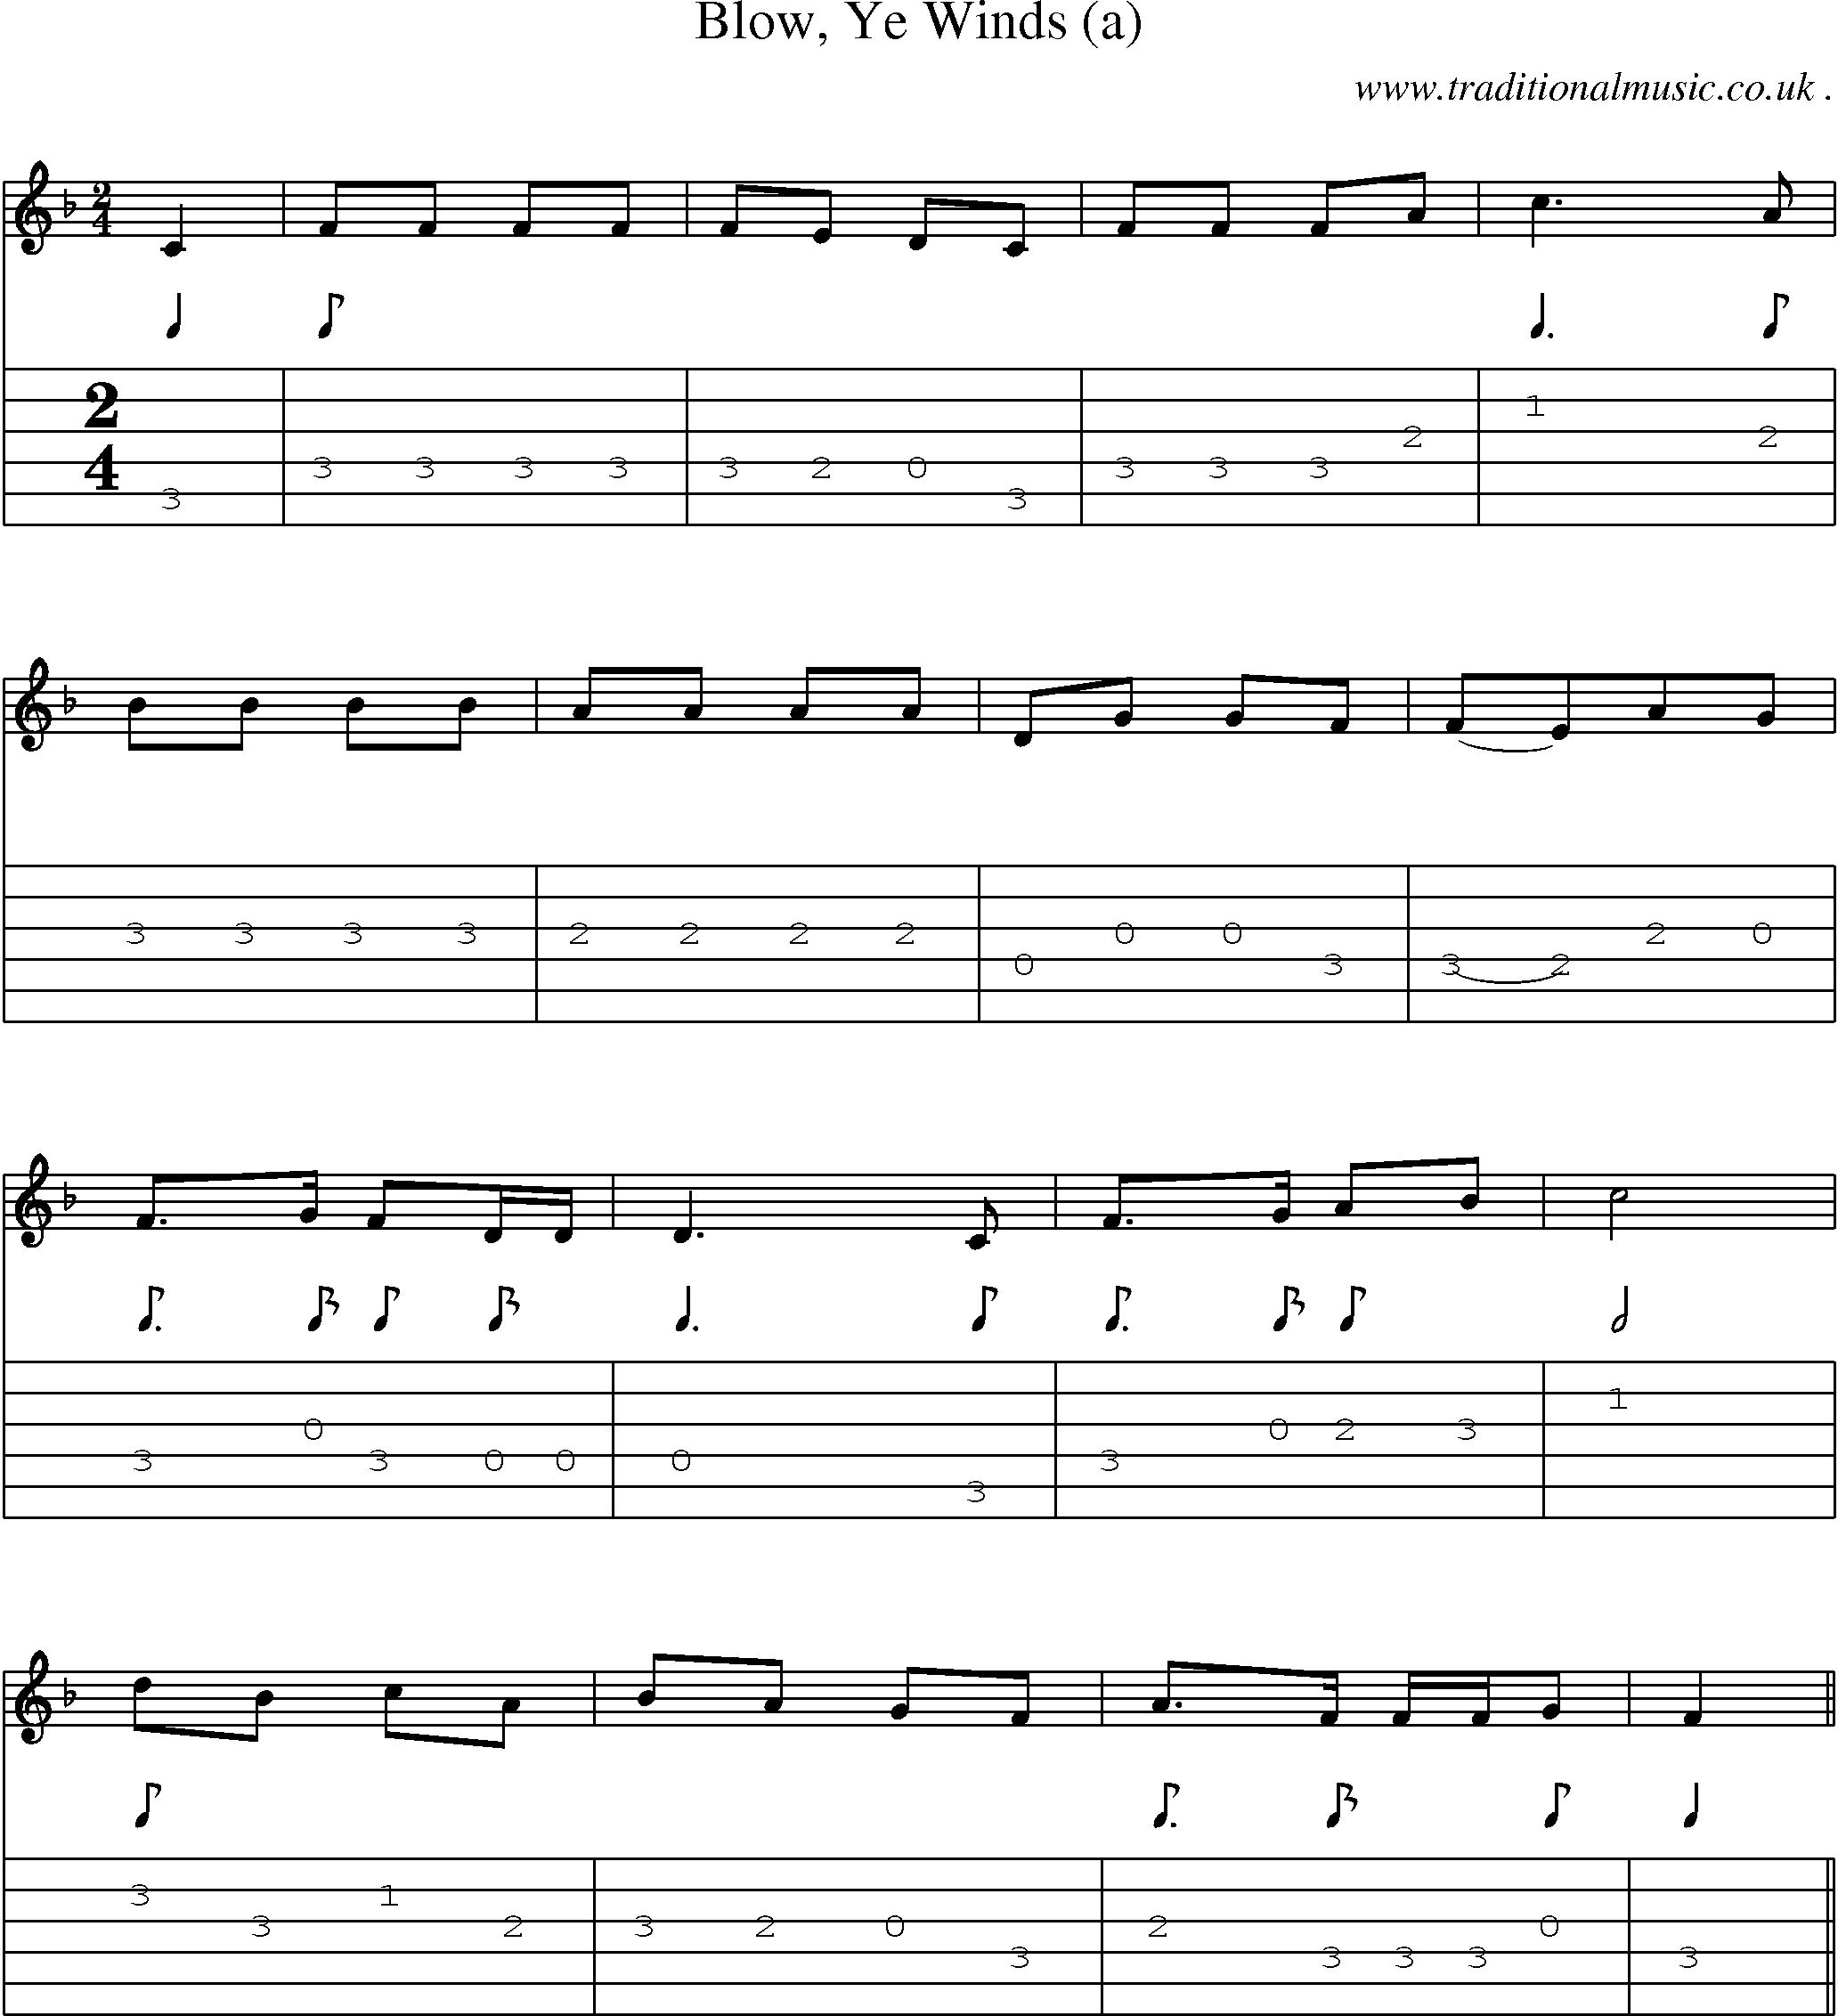 Sheet-Music and Guitar Tabs for Blow Ye Winds (a)